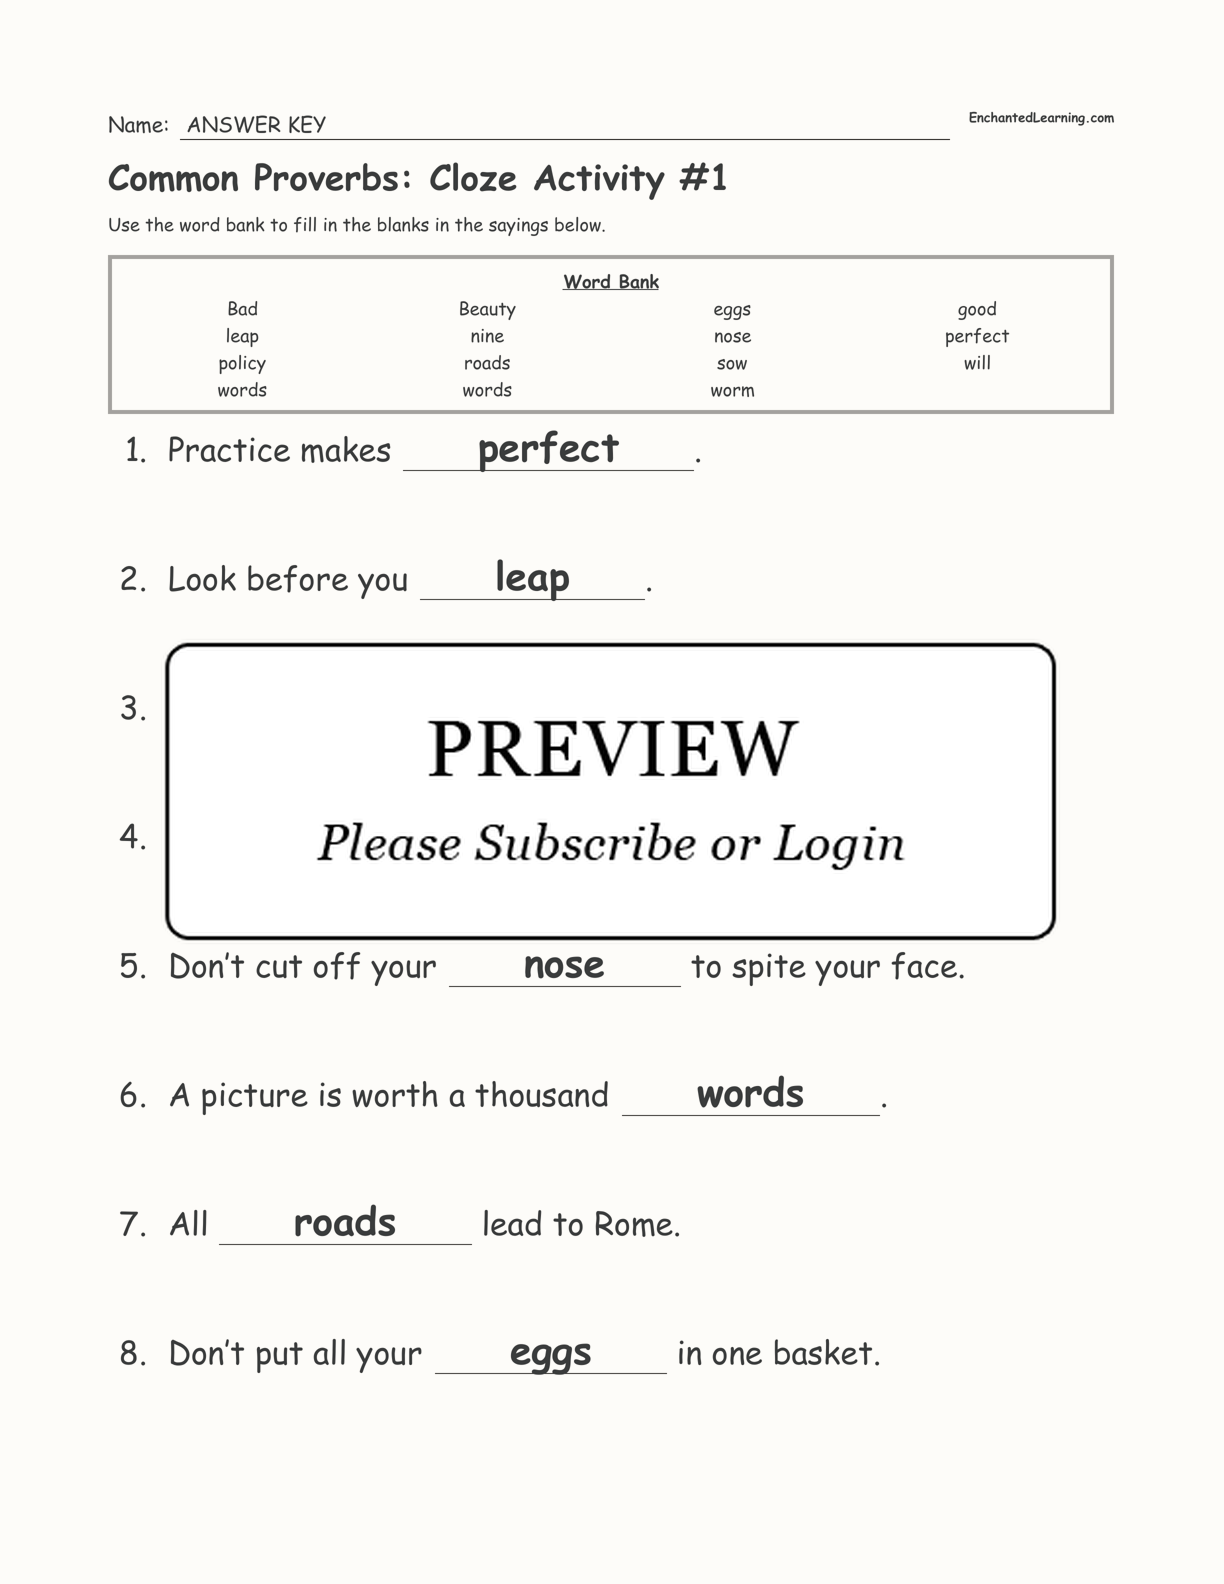 Common Proverbs: Cloze Activity #1 interactive worksheet page 3